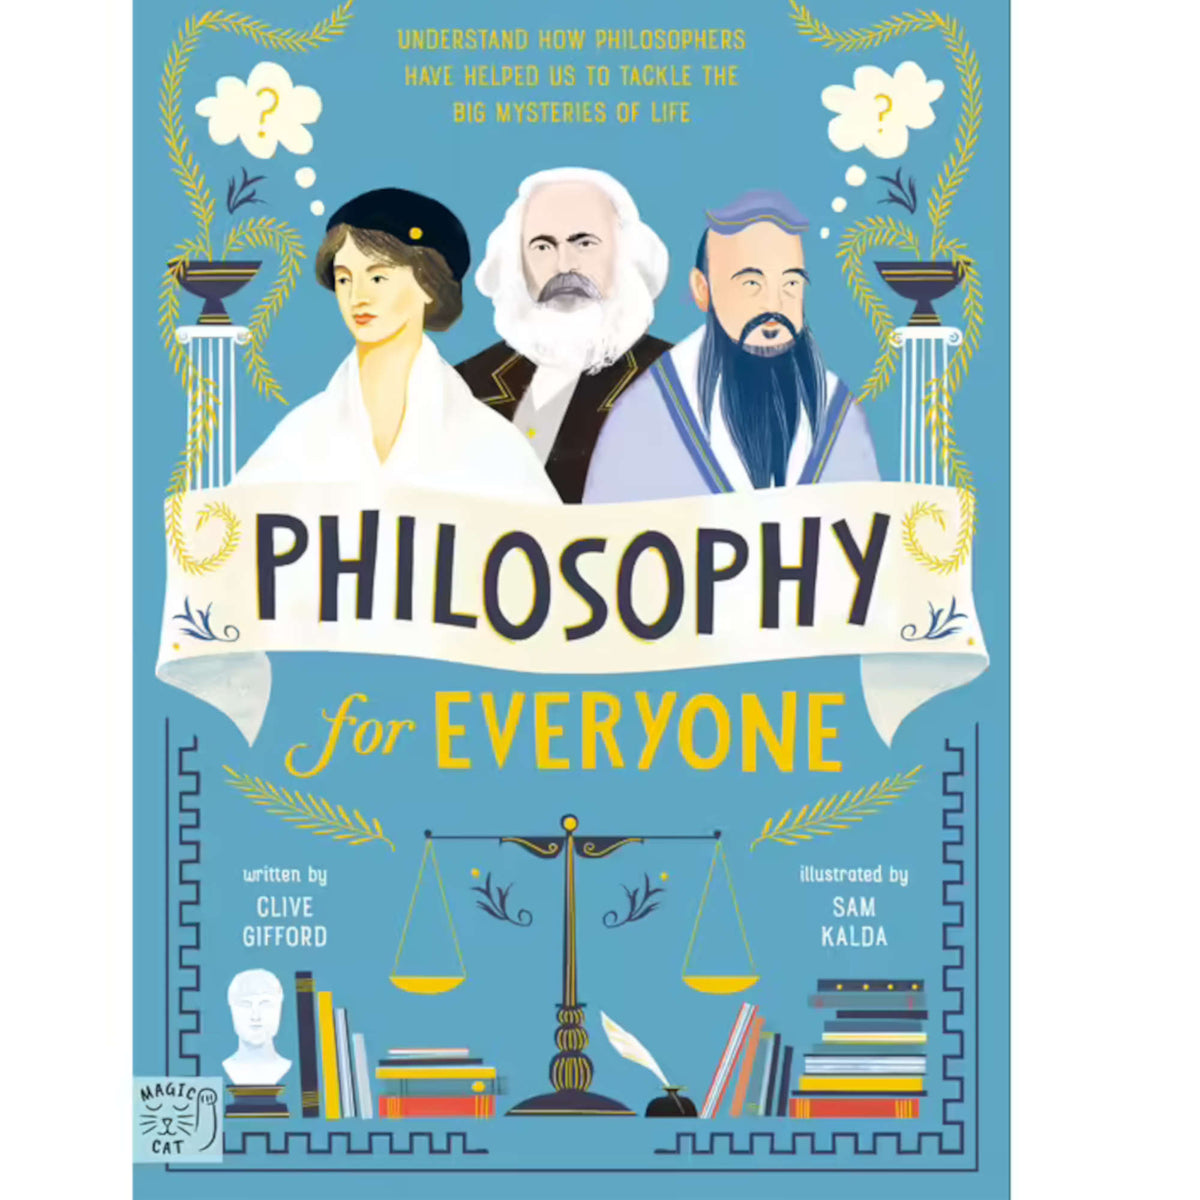 Philosophy for Everyone